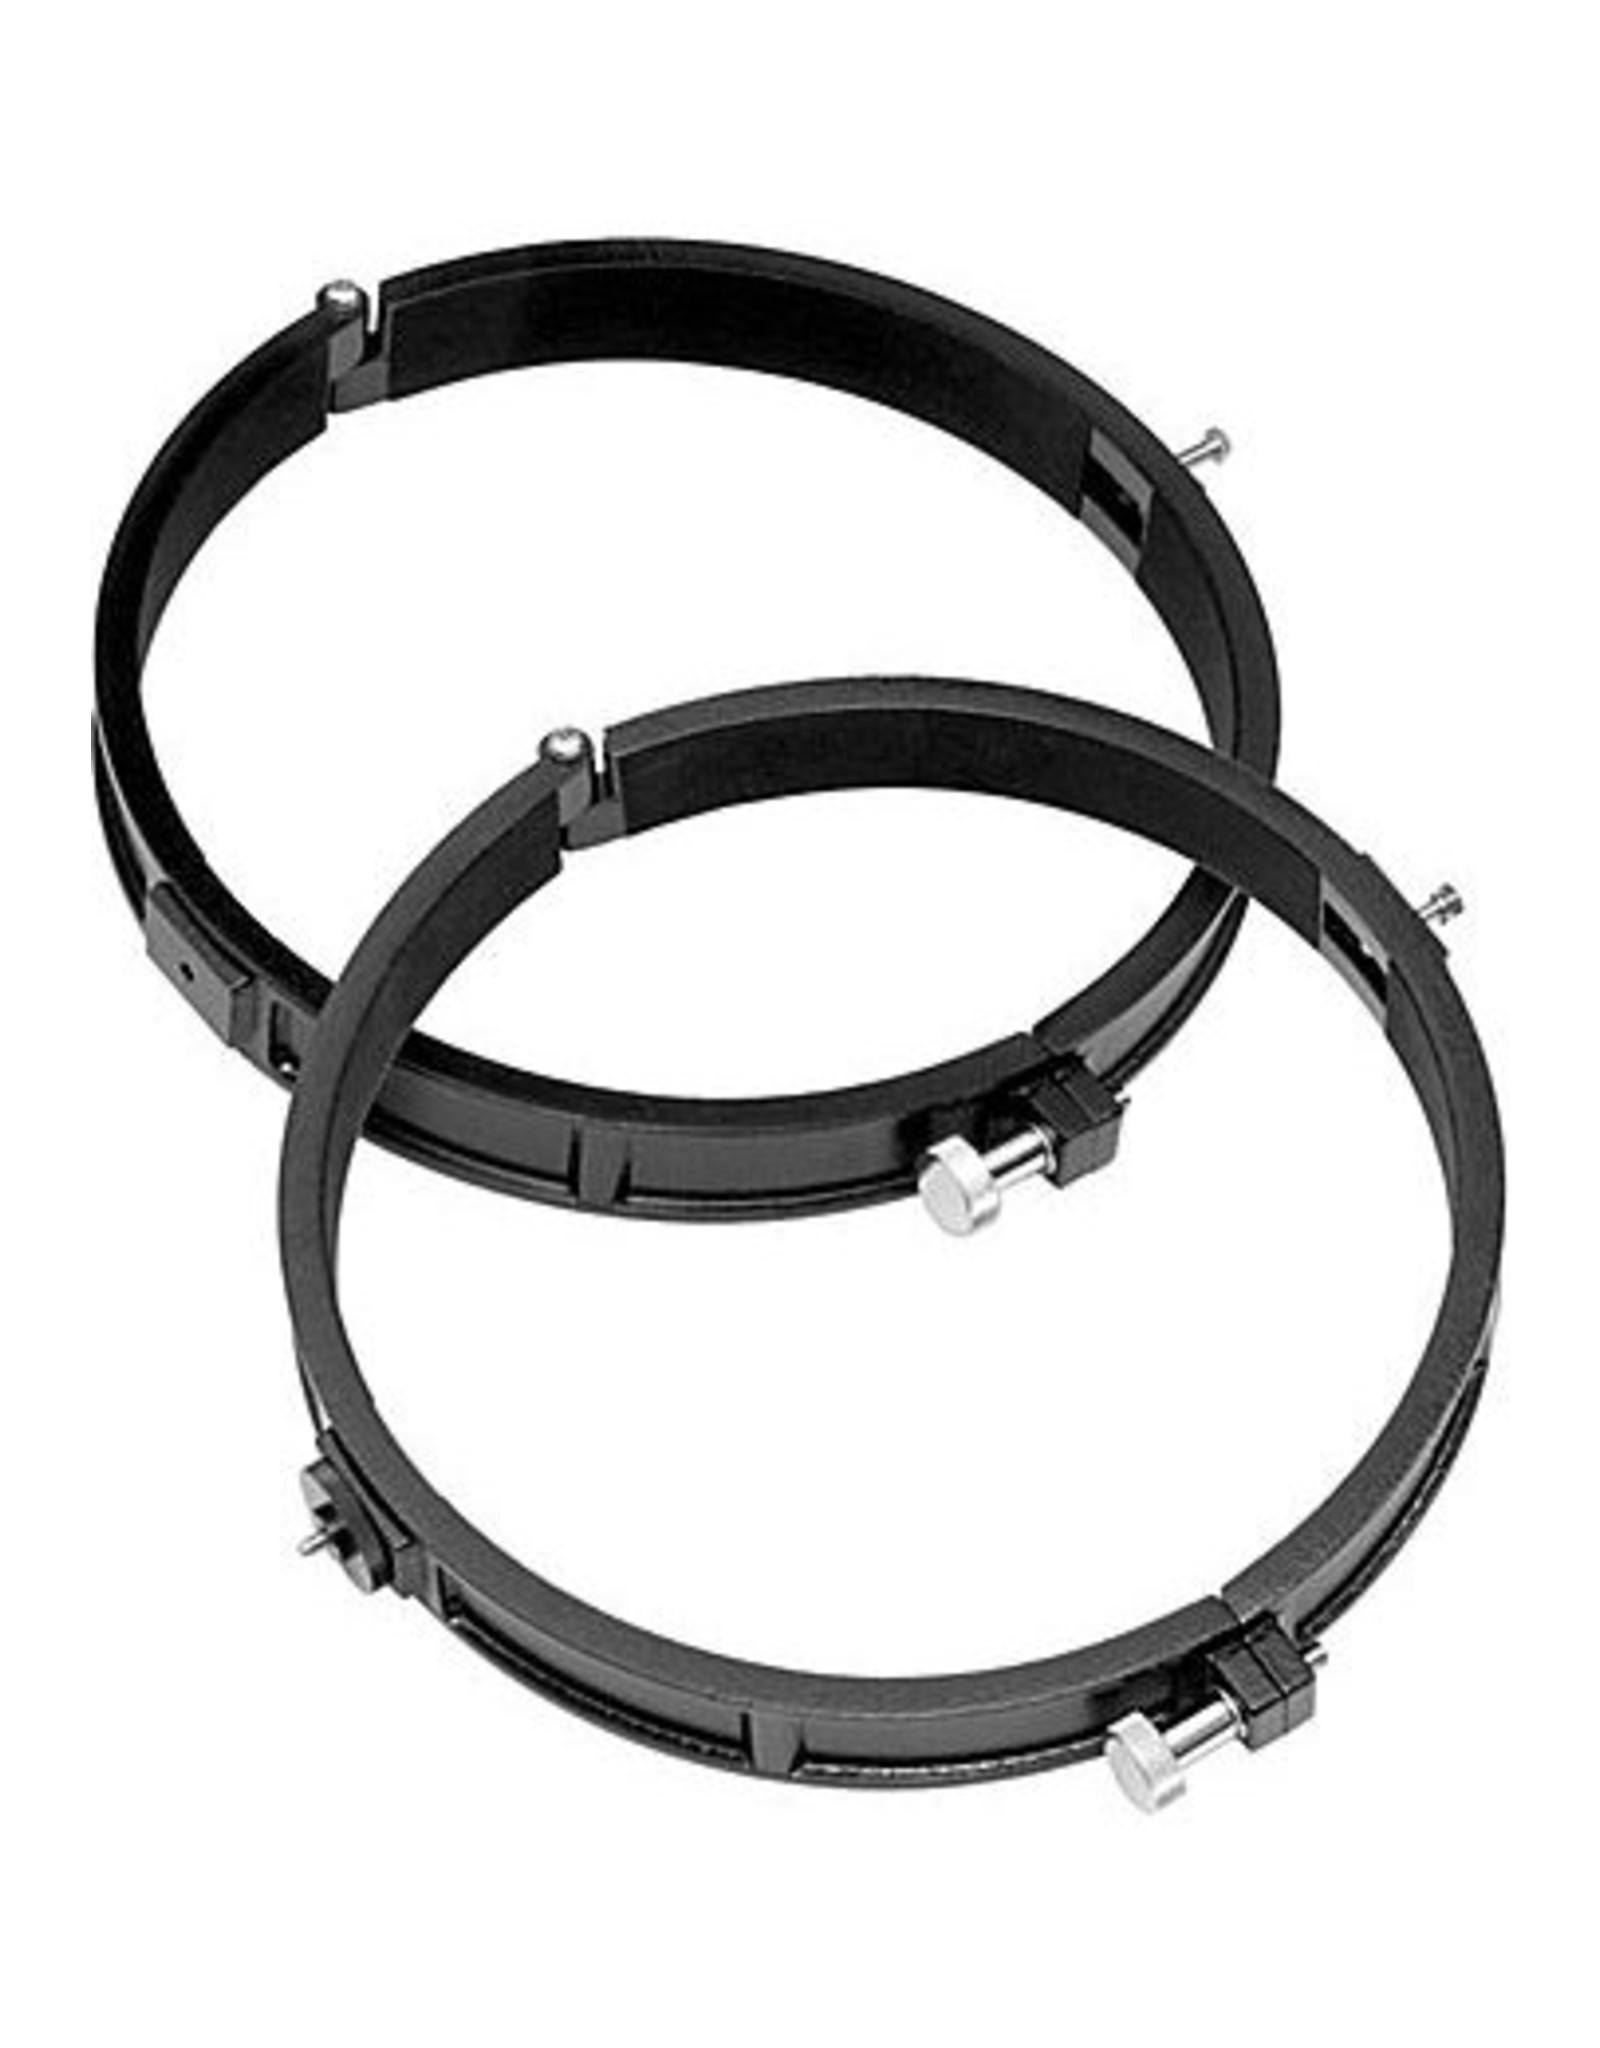 Orion Orion 182mm ID Telescope Tube Mounting Rings - Camera Concepts 182mm Id Orion Telescope Tube Rings